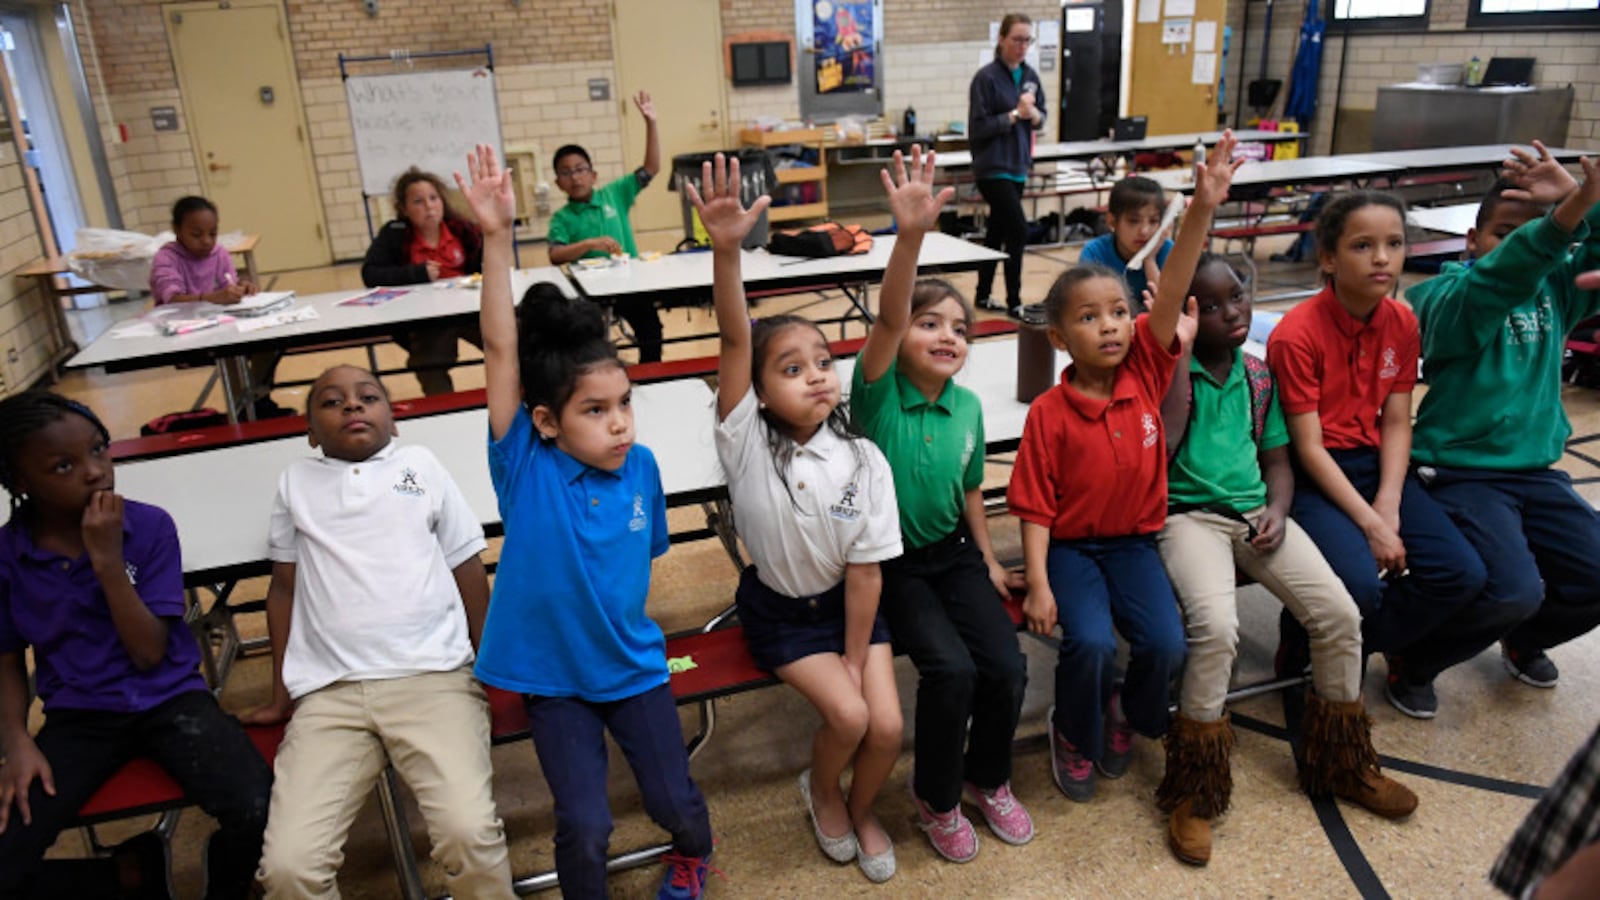 Aliyah Biggs, 6, second from left and Ashli Ramos-Rosales, 8, raise their hands to take part in an after-school talent show at Ashley Elementary in Denver.